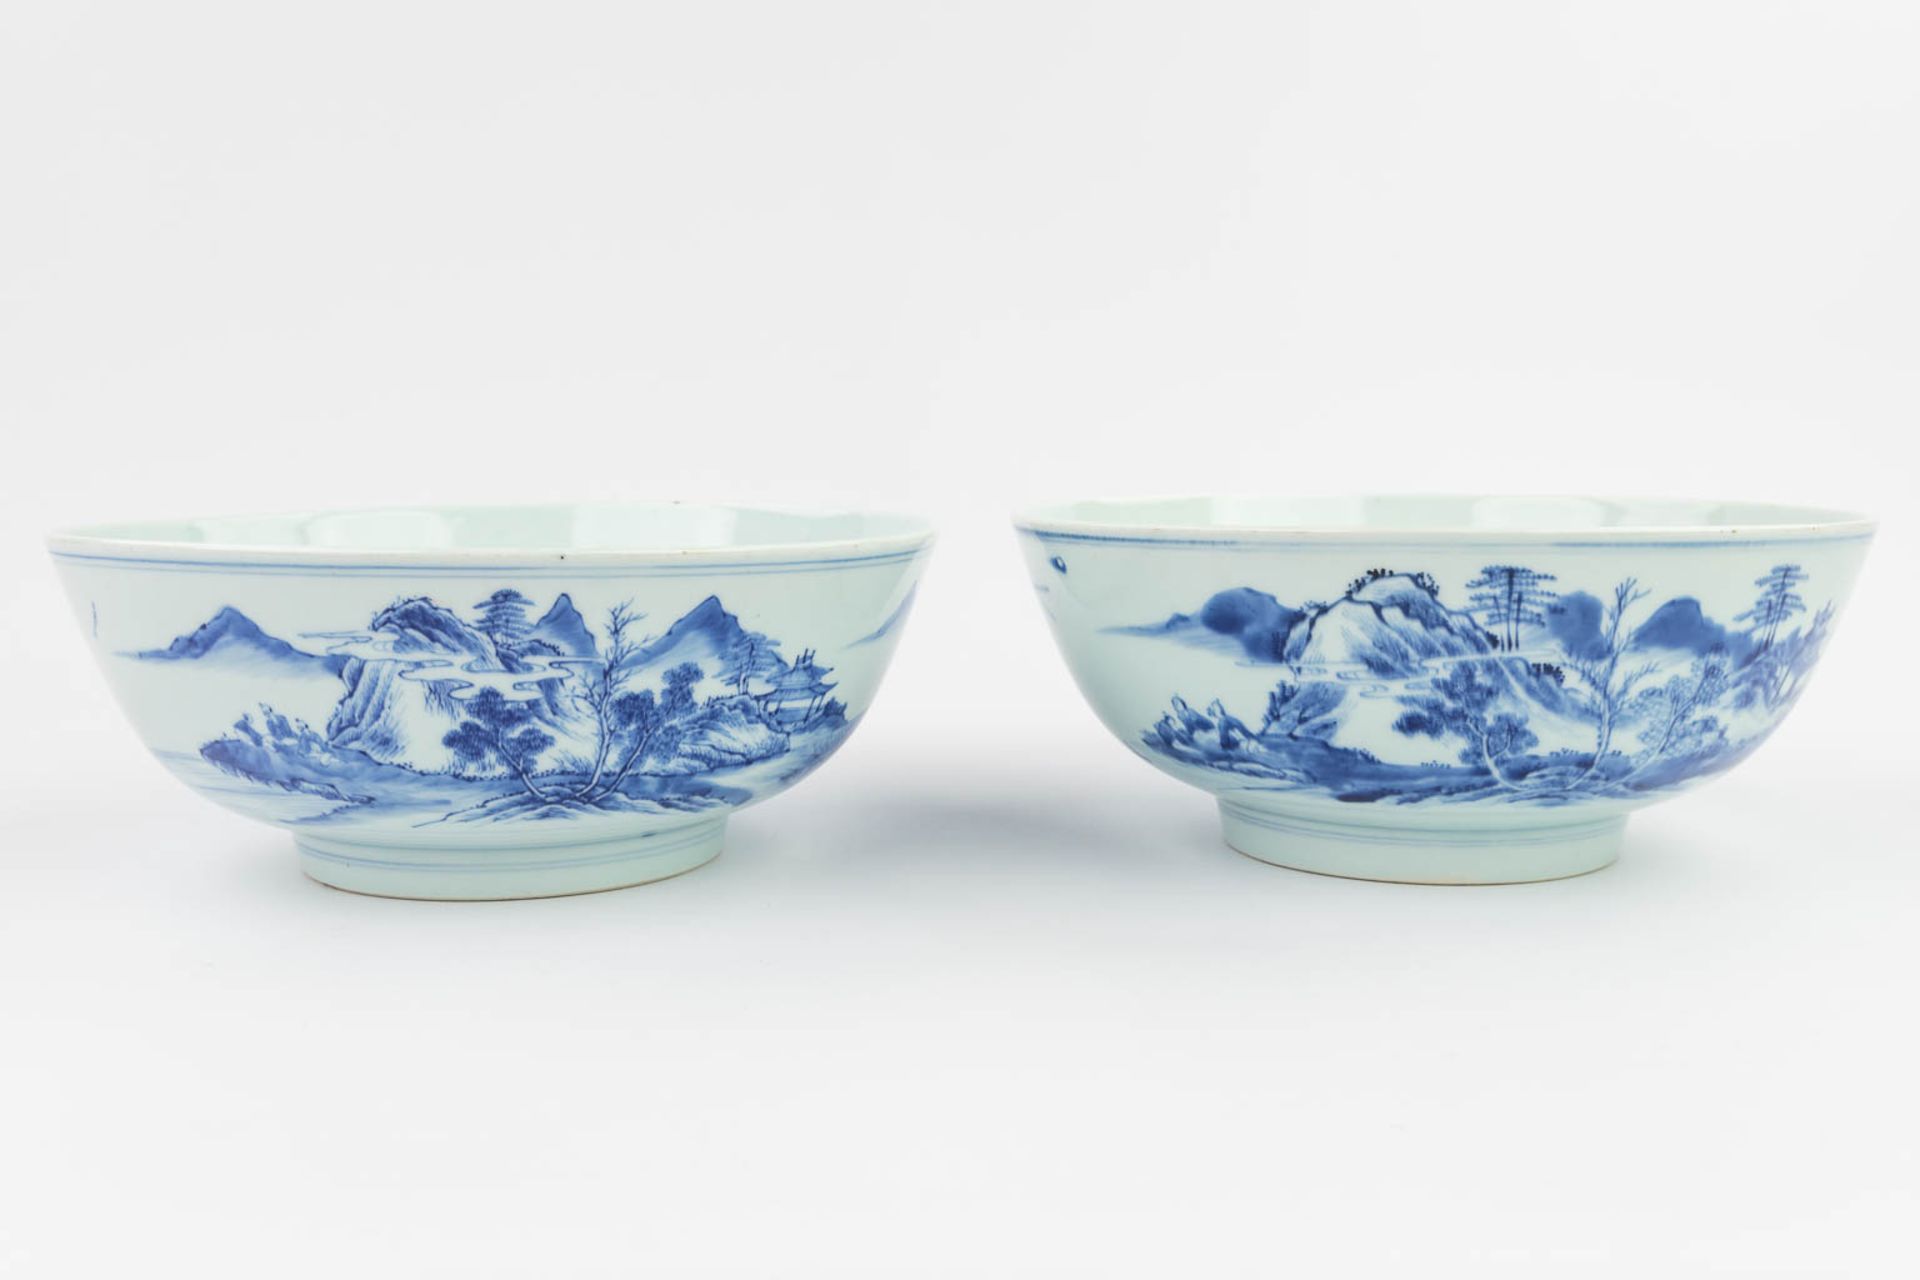 A pair of Chinese bowls made of blue-white porcelain. 18th/19th century. (H: 11 x D: 26,5 cm) - Image 9 of 17